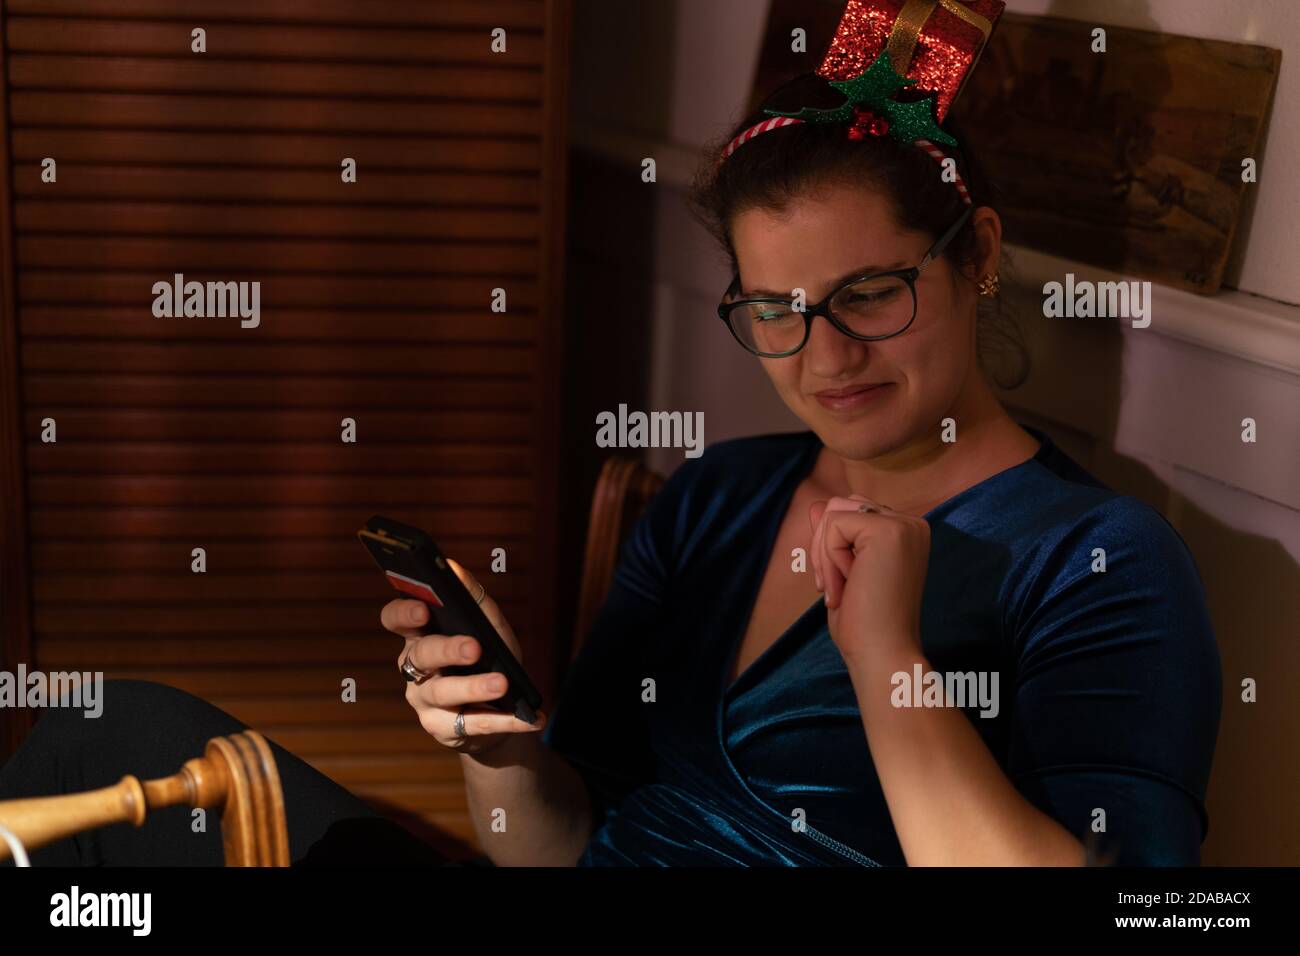 Young woman with christmas hair decor looking not amused into her mobile phone at christmas. Stock Photo